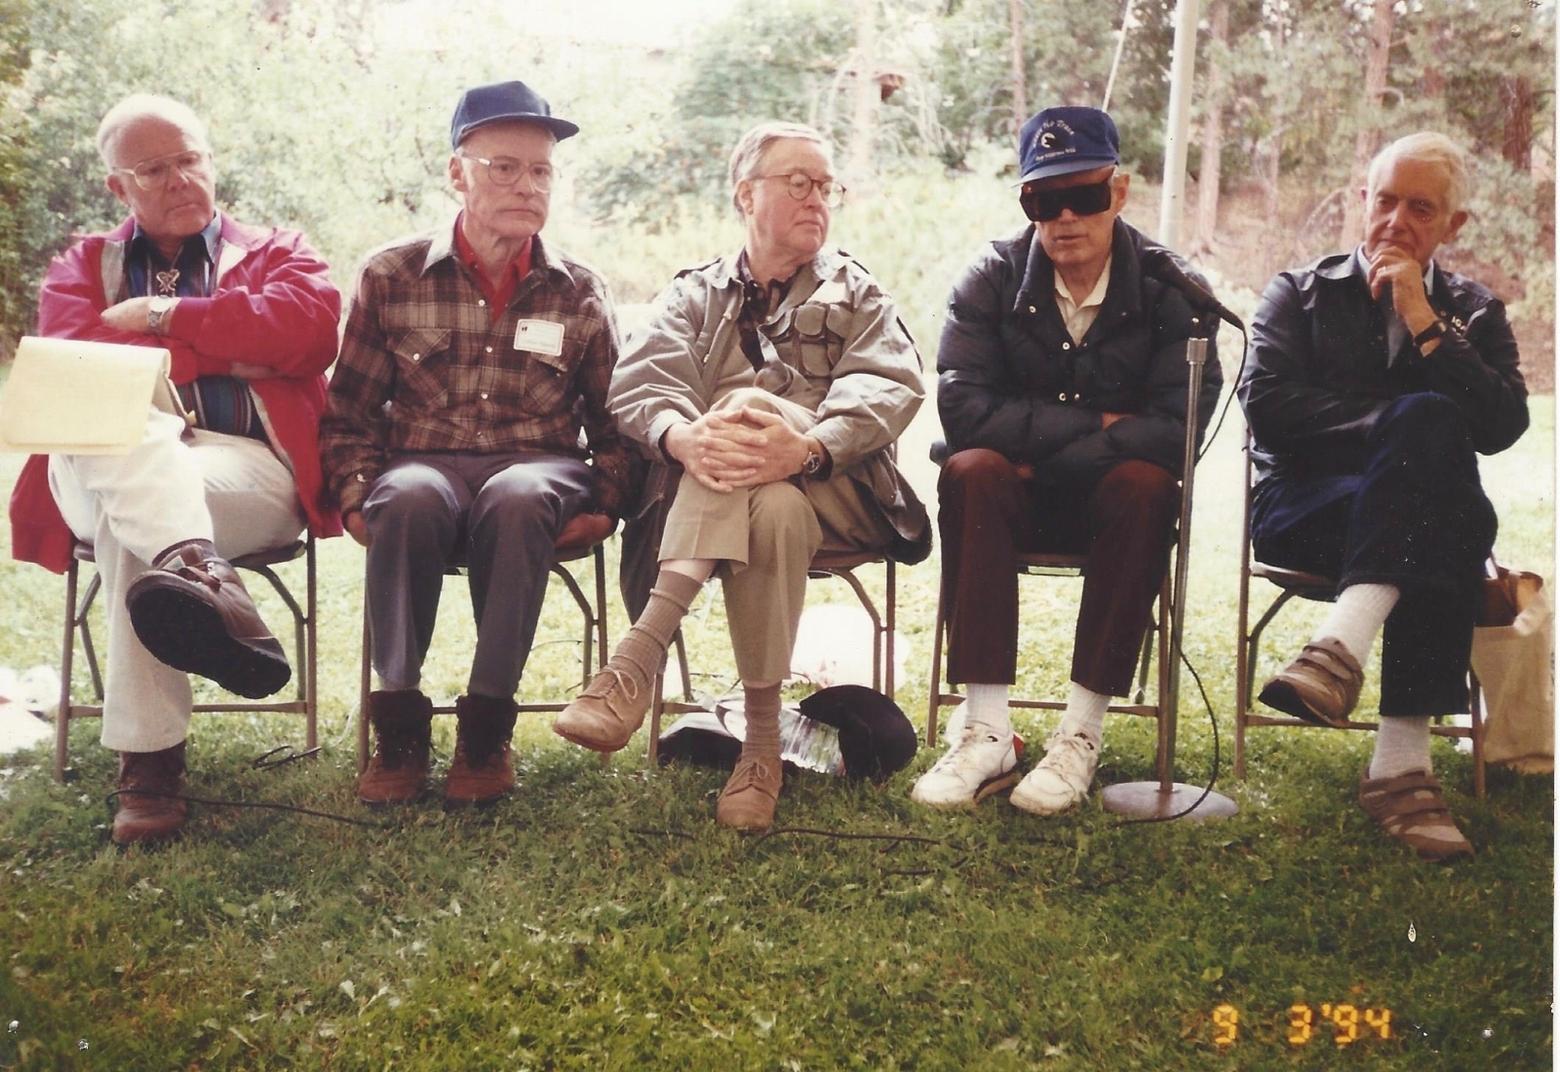 1994, a group of conservation luminaries gathered at the Craighead Institute in Missoula to celebrate the 30th anniversary of the Wilderness Act's passage. Bookending the conversation were Stewart Brandborg, far left, and David Brower, far right. Photo courtesy Larry Campbell 